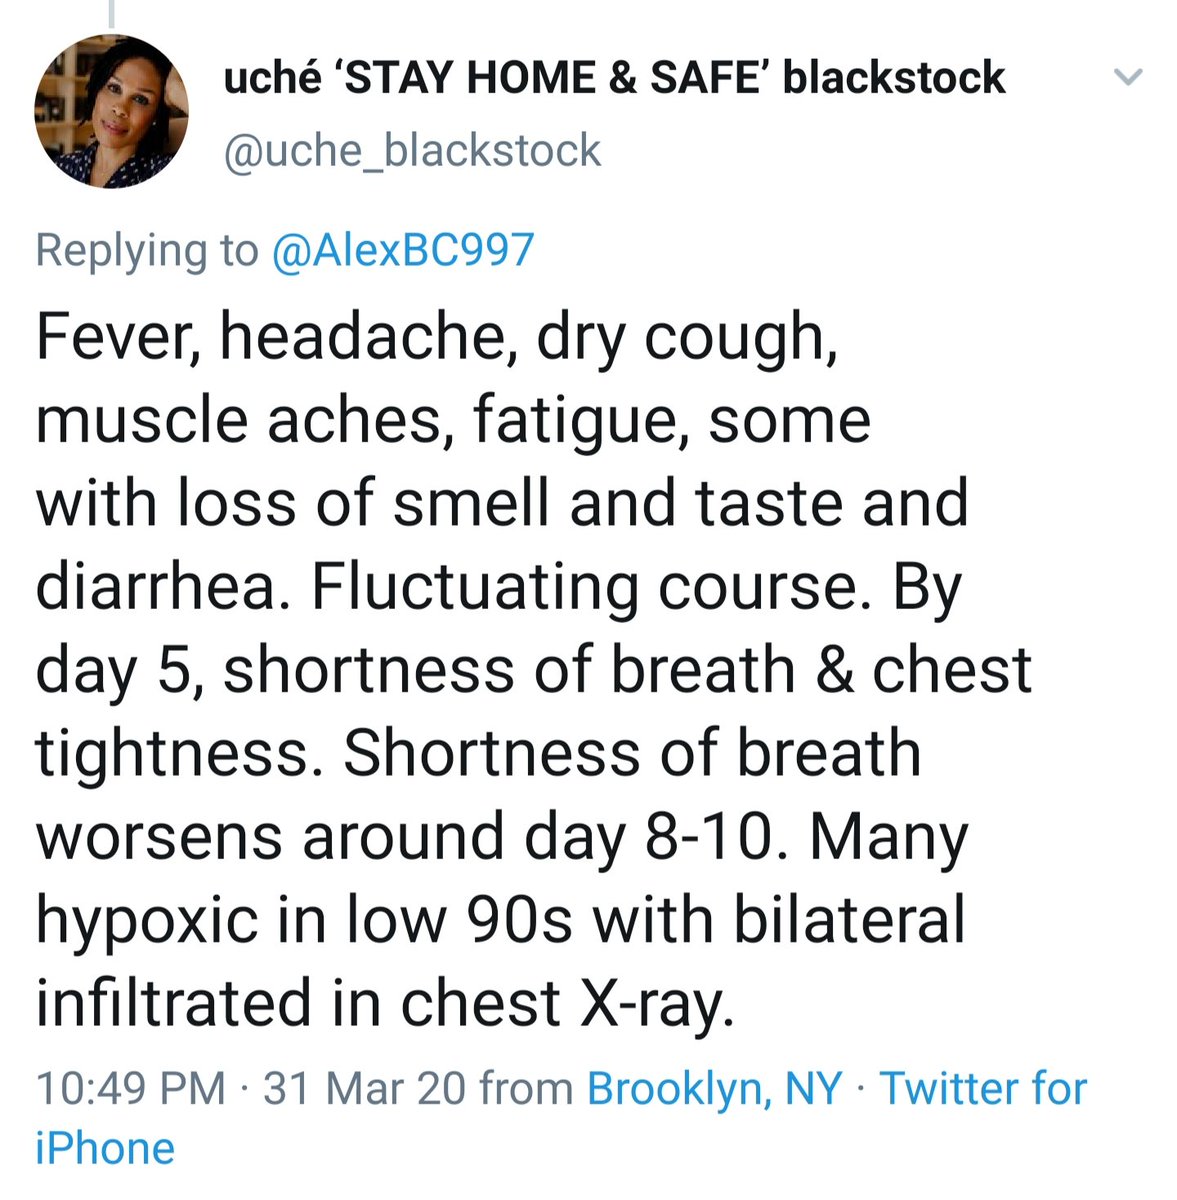 Then sleep 9 more hours.Somewhere in there, I saw this tweet.And it somehow made me feel better to see someone working with COVID19 patients in NYC describe my symptoms exactly, except luckily I didn't get to the point of respiratory issues.